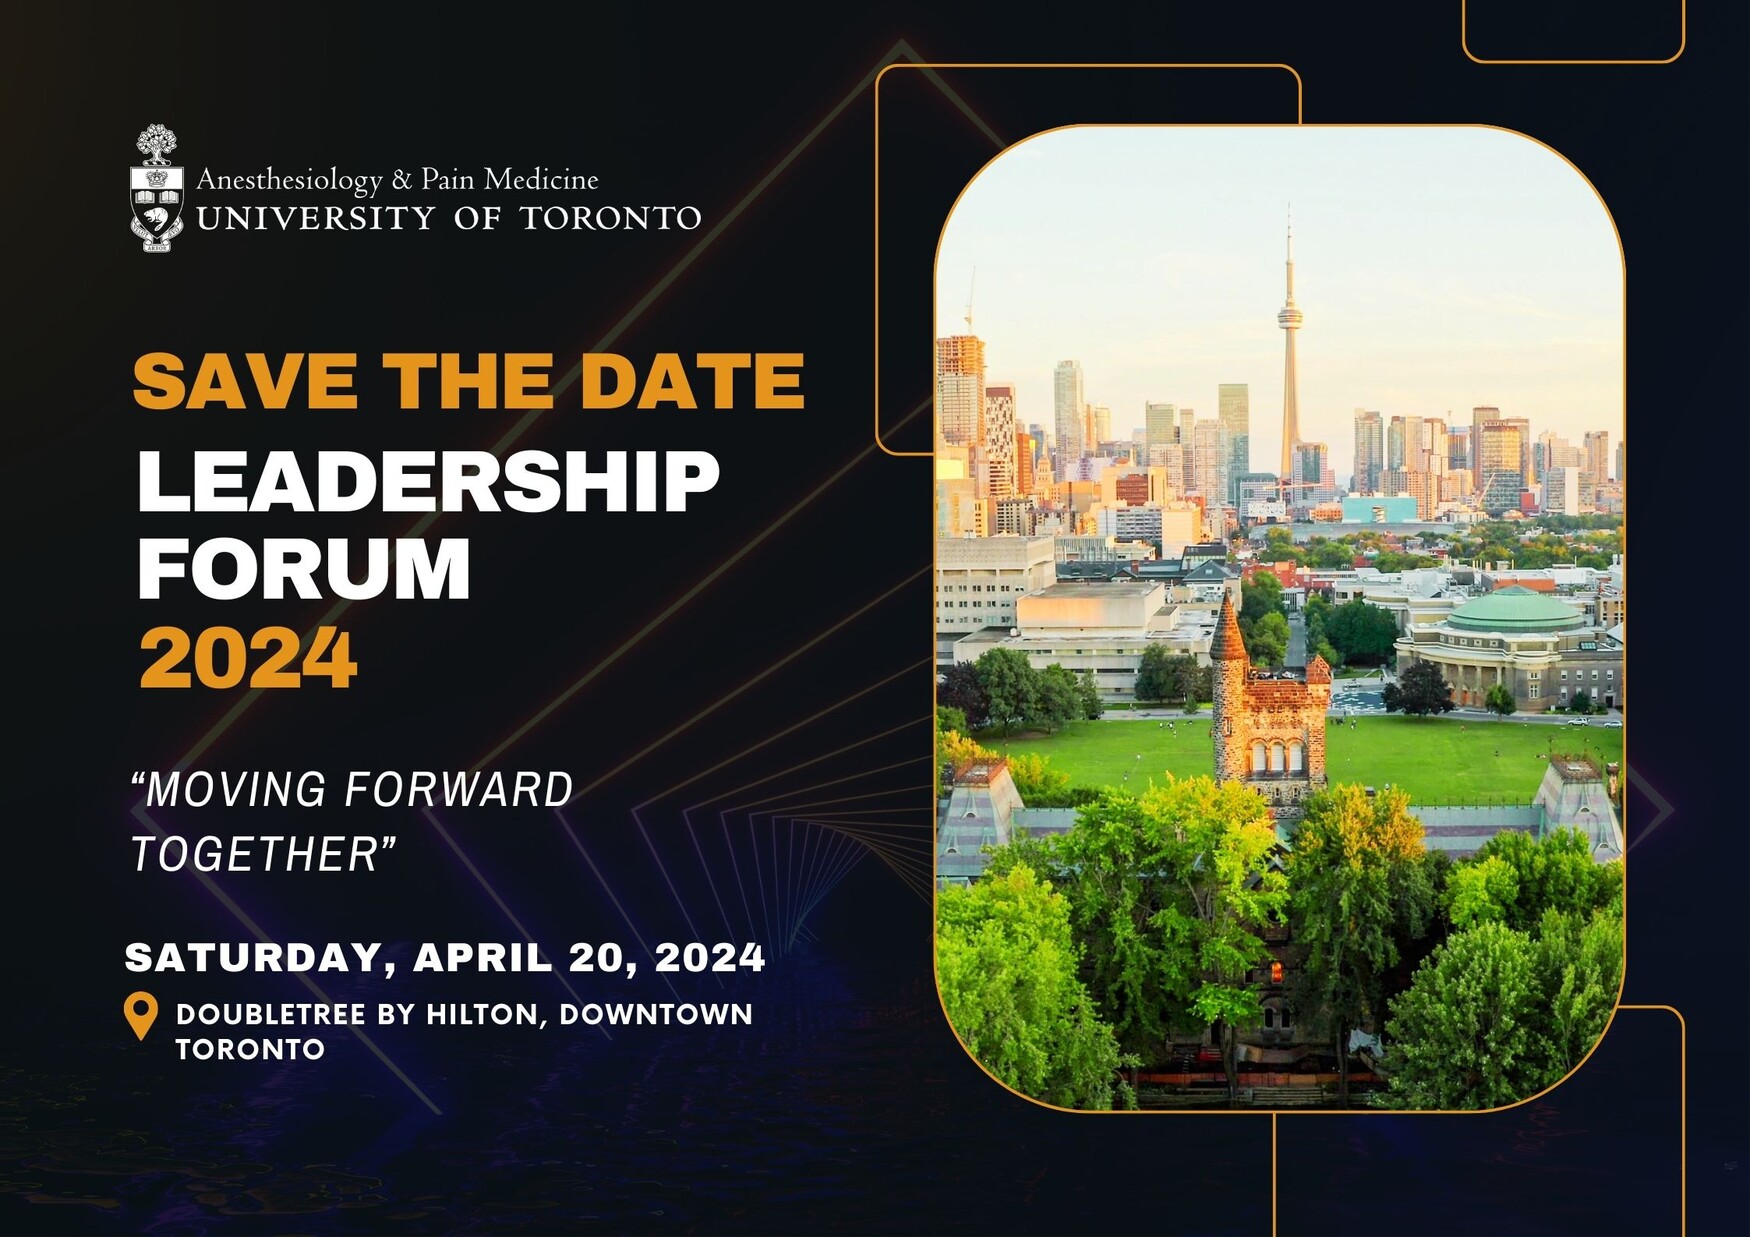 Save the date: Leadership Forum 2024: Collaborate and Innovate